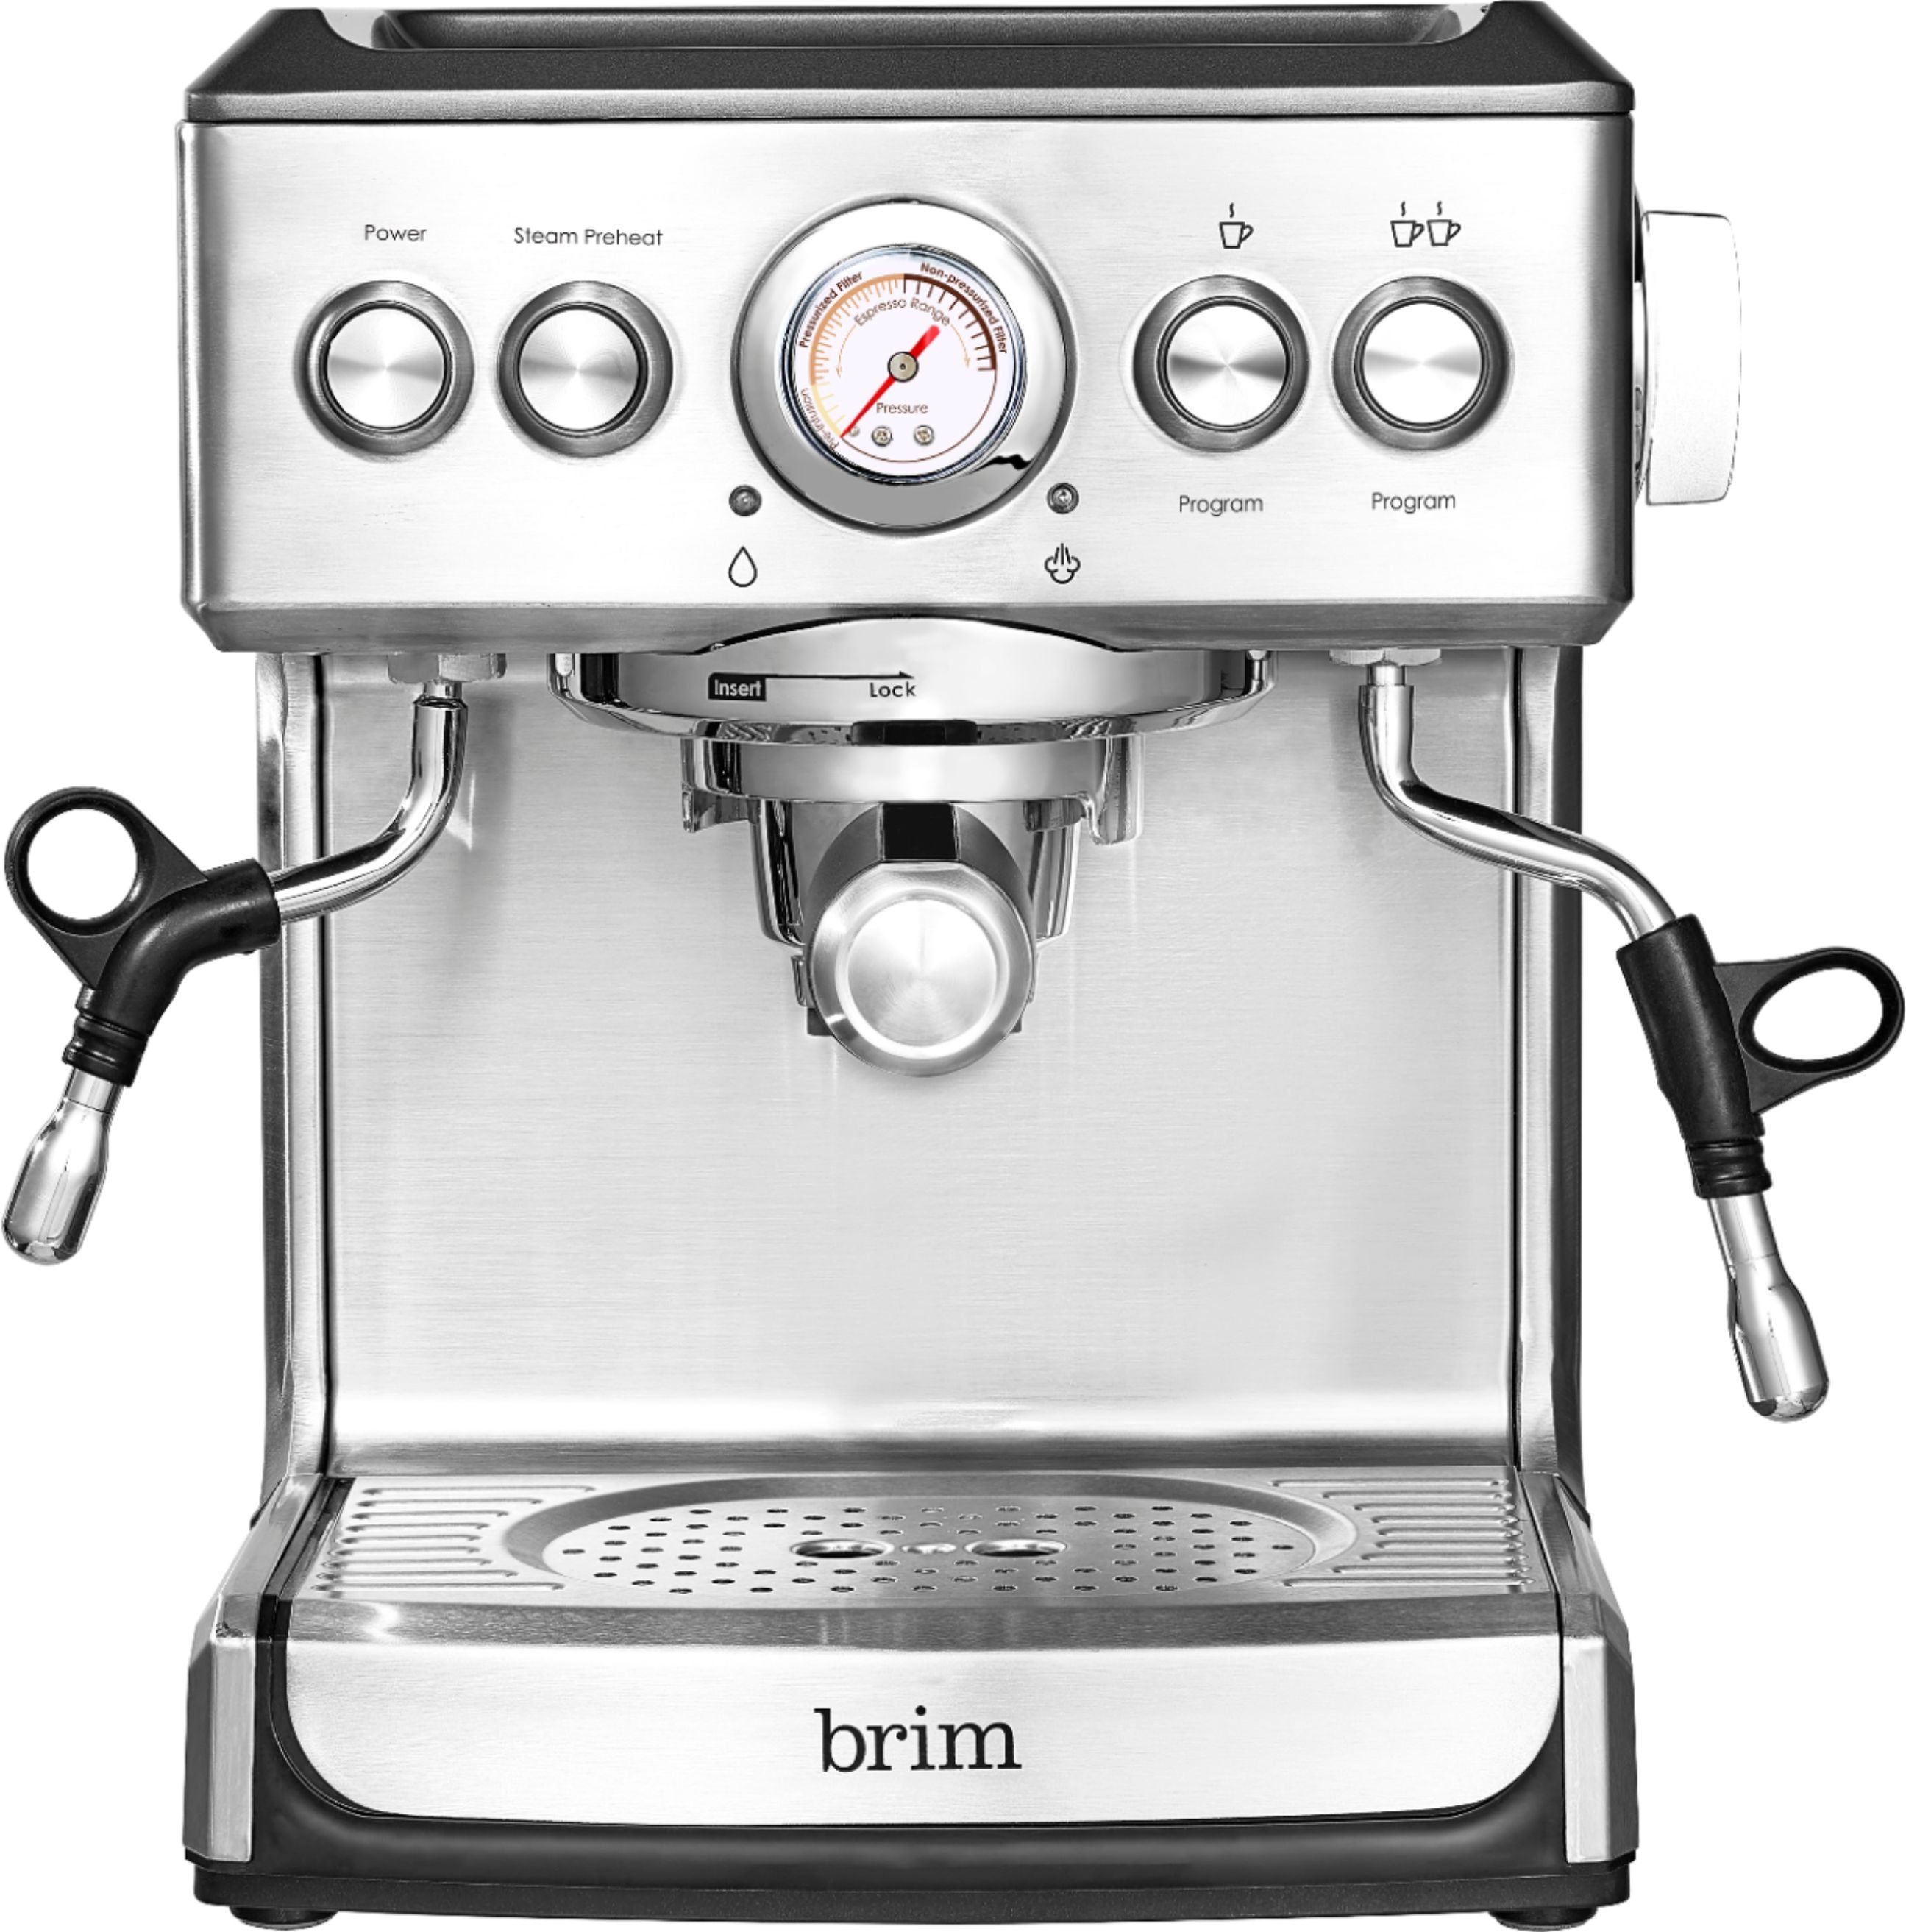 Brim Espresso Maker with 19 bars of pressure, Milk Frother and Removable water tank Silver 50019 ... | Best Buy U.S.